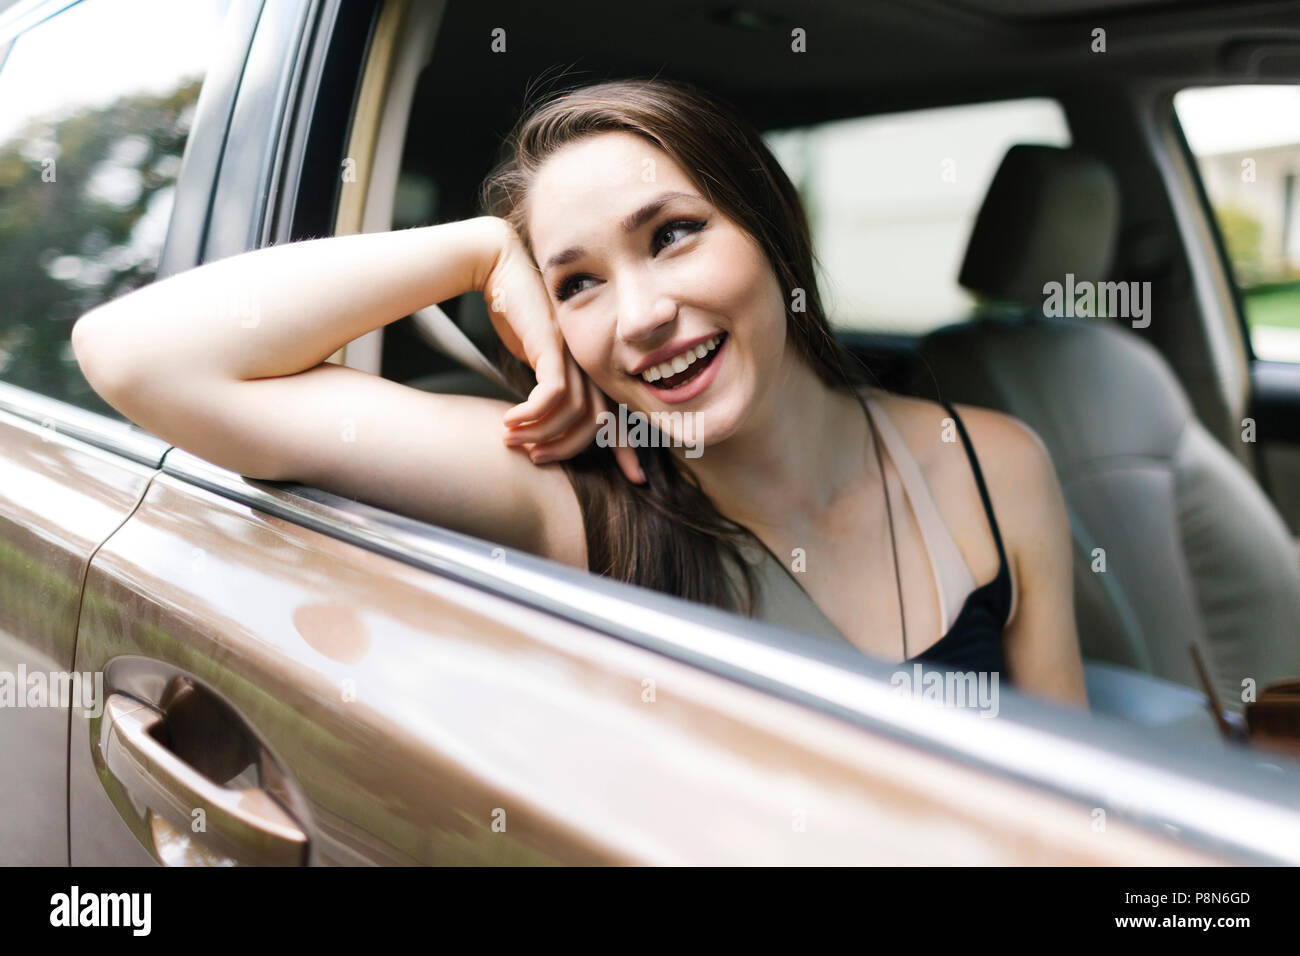 Smiling young woman sitting in car Banque D'Images